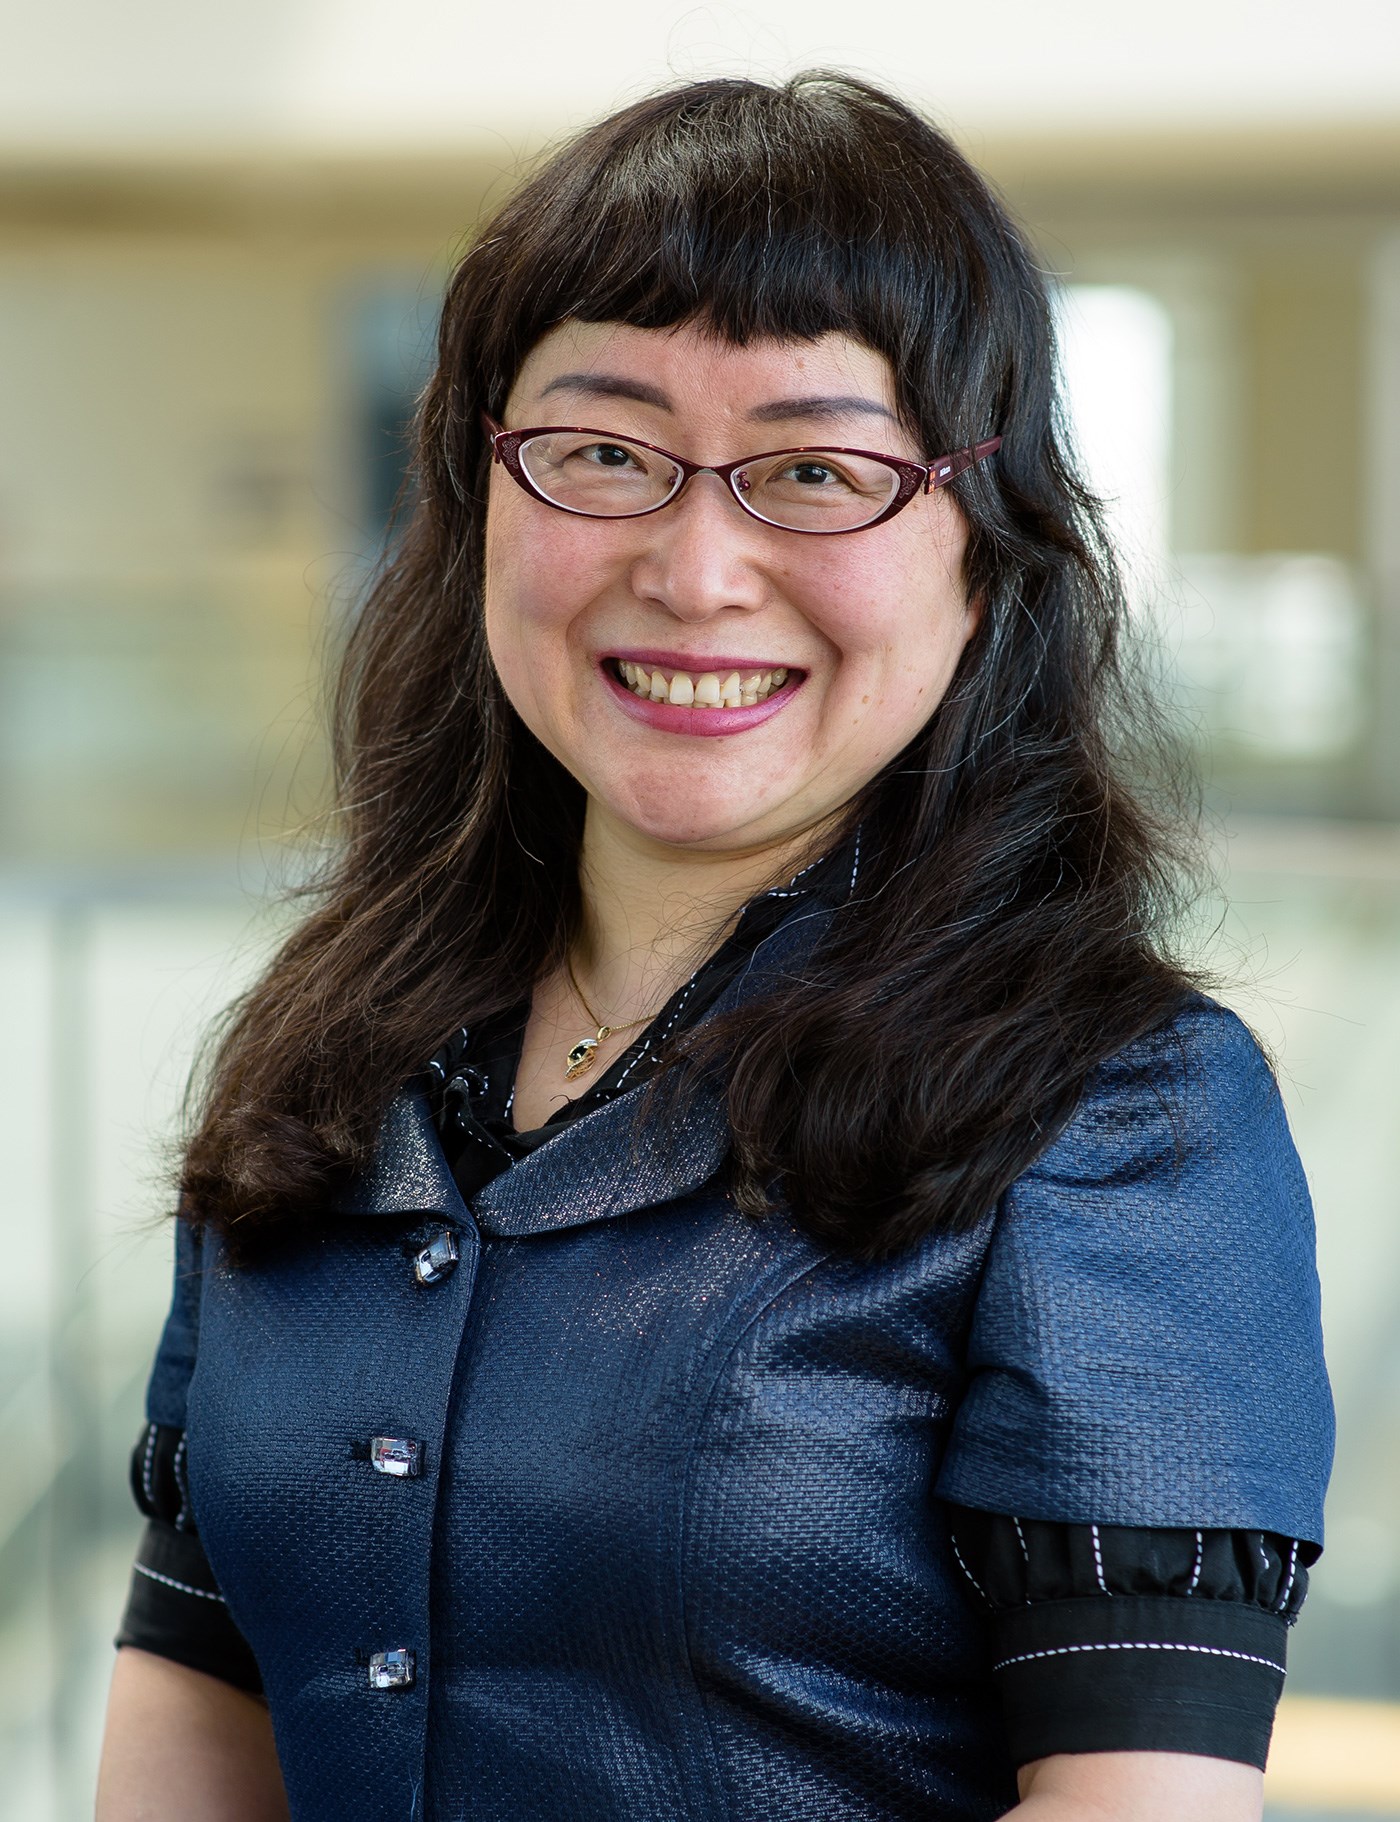 Chunxiao (Tricia) Chigan is an Associate Professor in the Francis College of Engineering's Electrical & Computer Engineering Dept. at UMass Lowell.